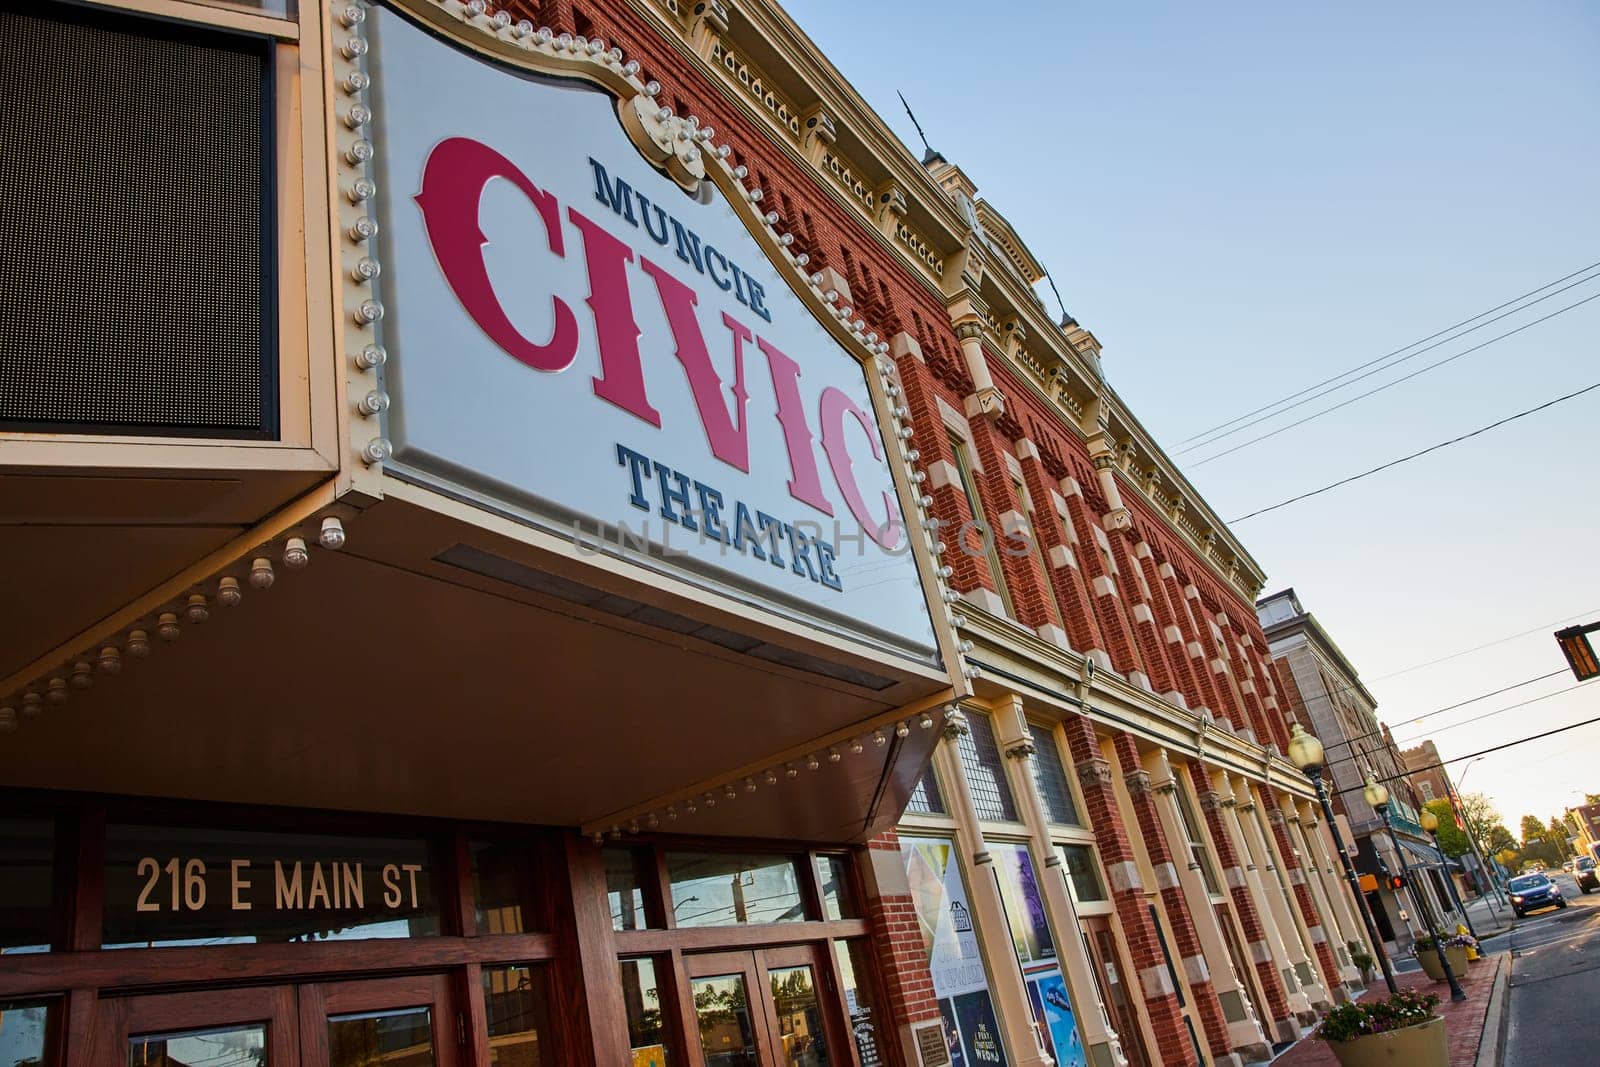 Vintage Charm of Muncie Civic Theatre in Downtown Indiana, Captured in Golden Hour Sunlight